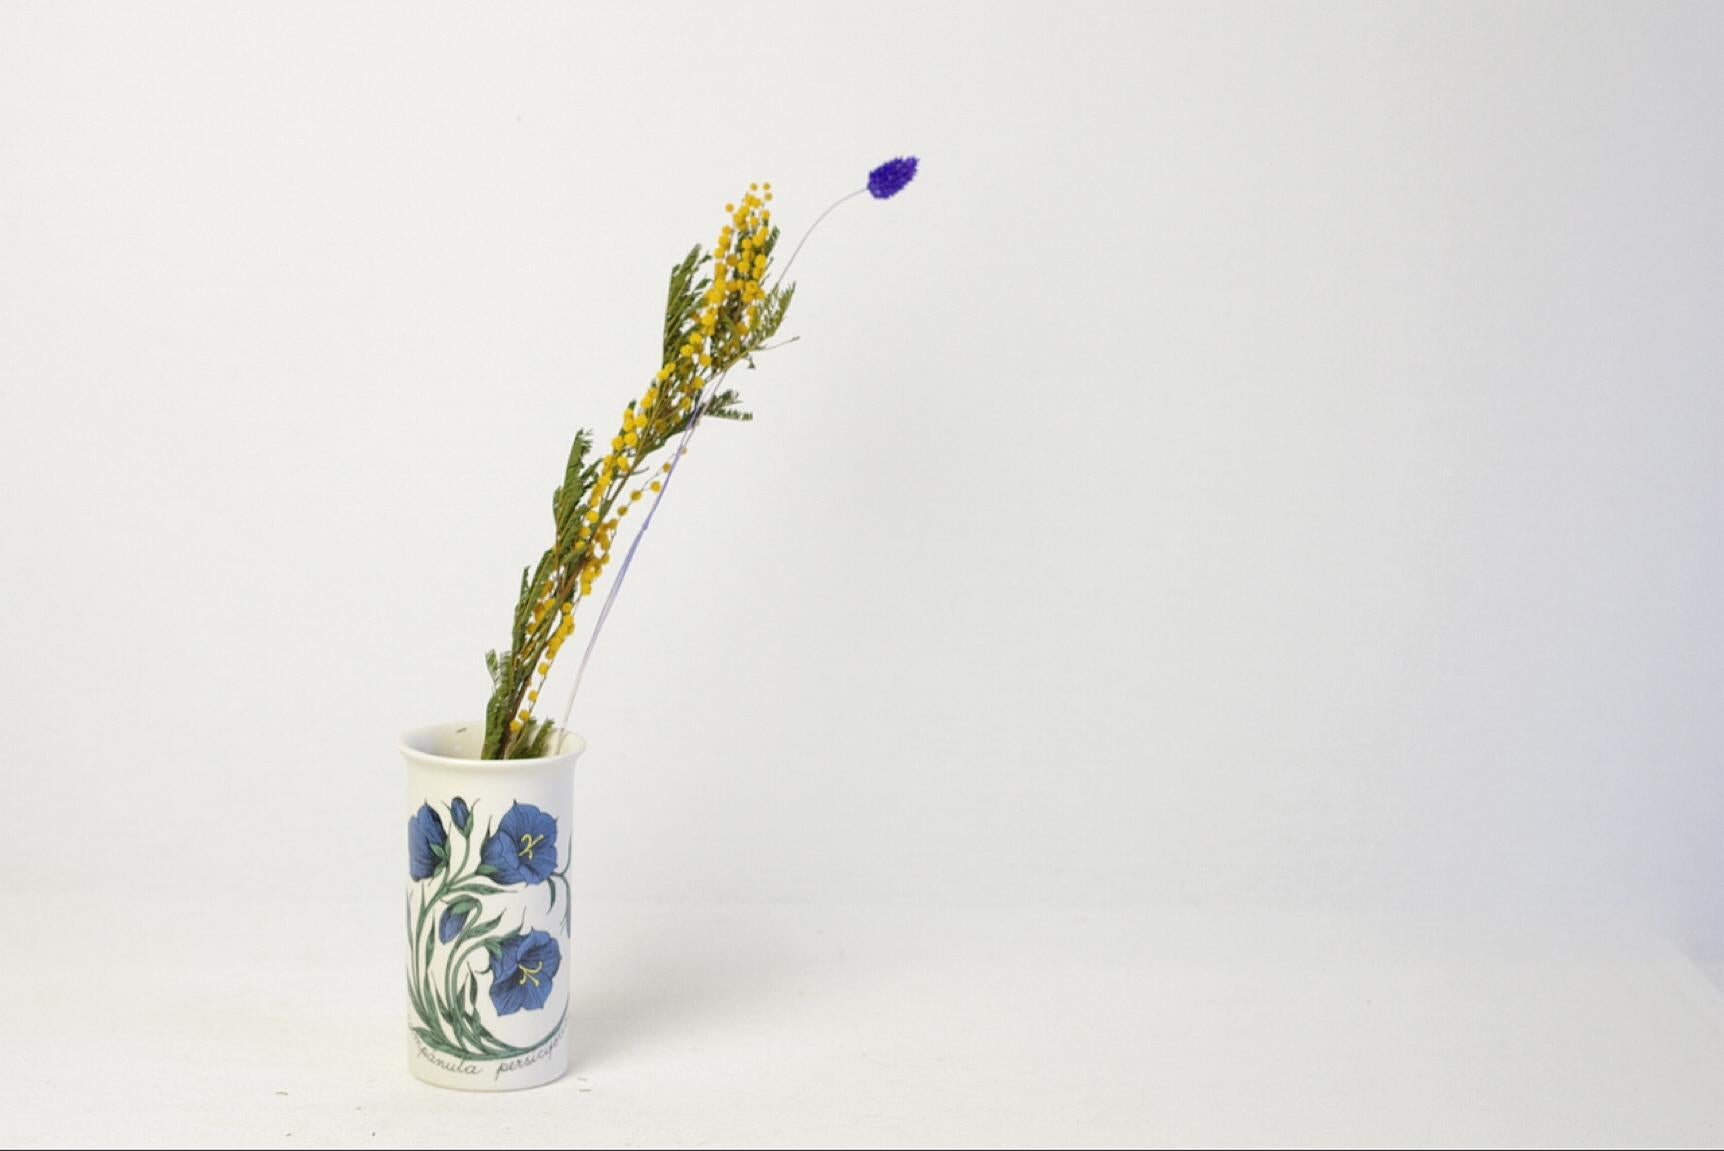 Product Description: 
The Botanica-series of which this vase is a member was designed by Esteri Tomula for Arabia. Esteri Tomula used the flora of Finland as inspiration for the painting made on her simple but dutiful vases and plates. The flower